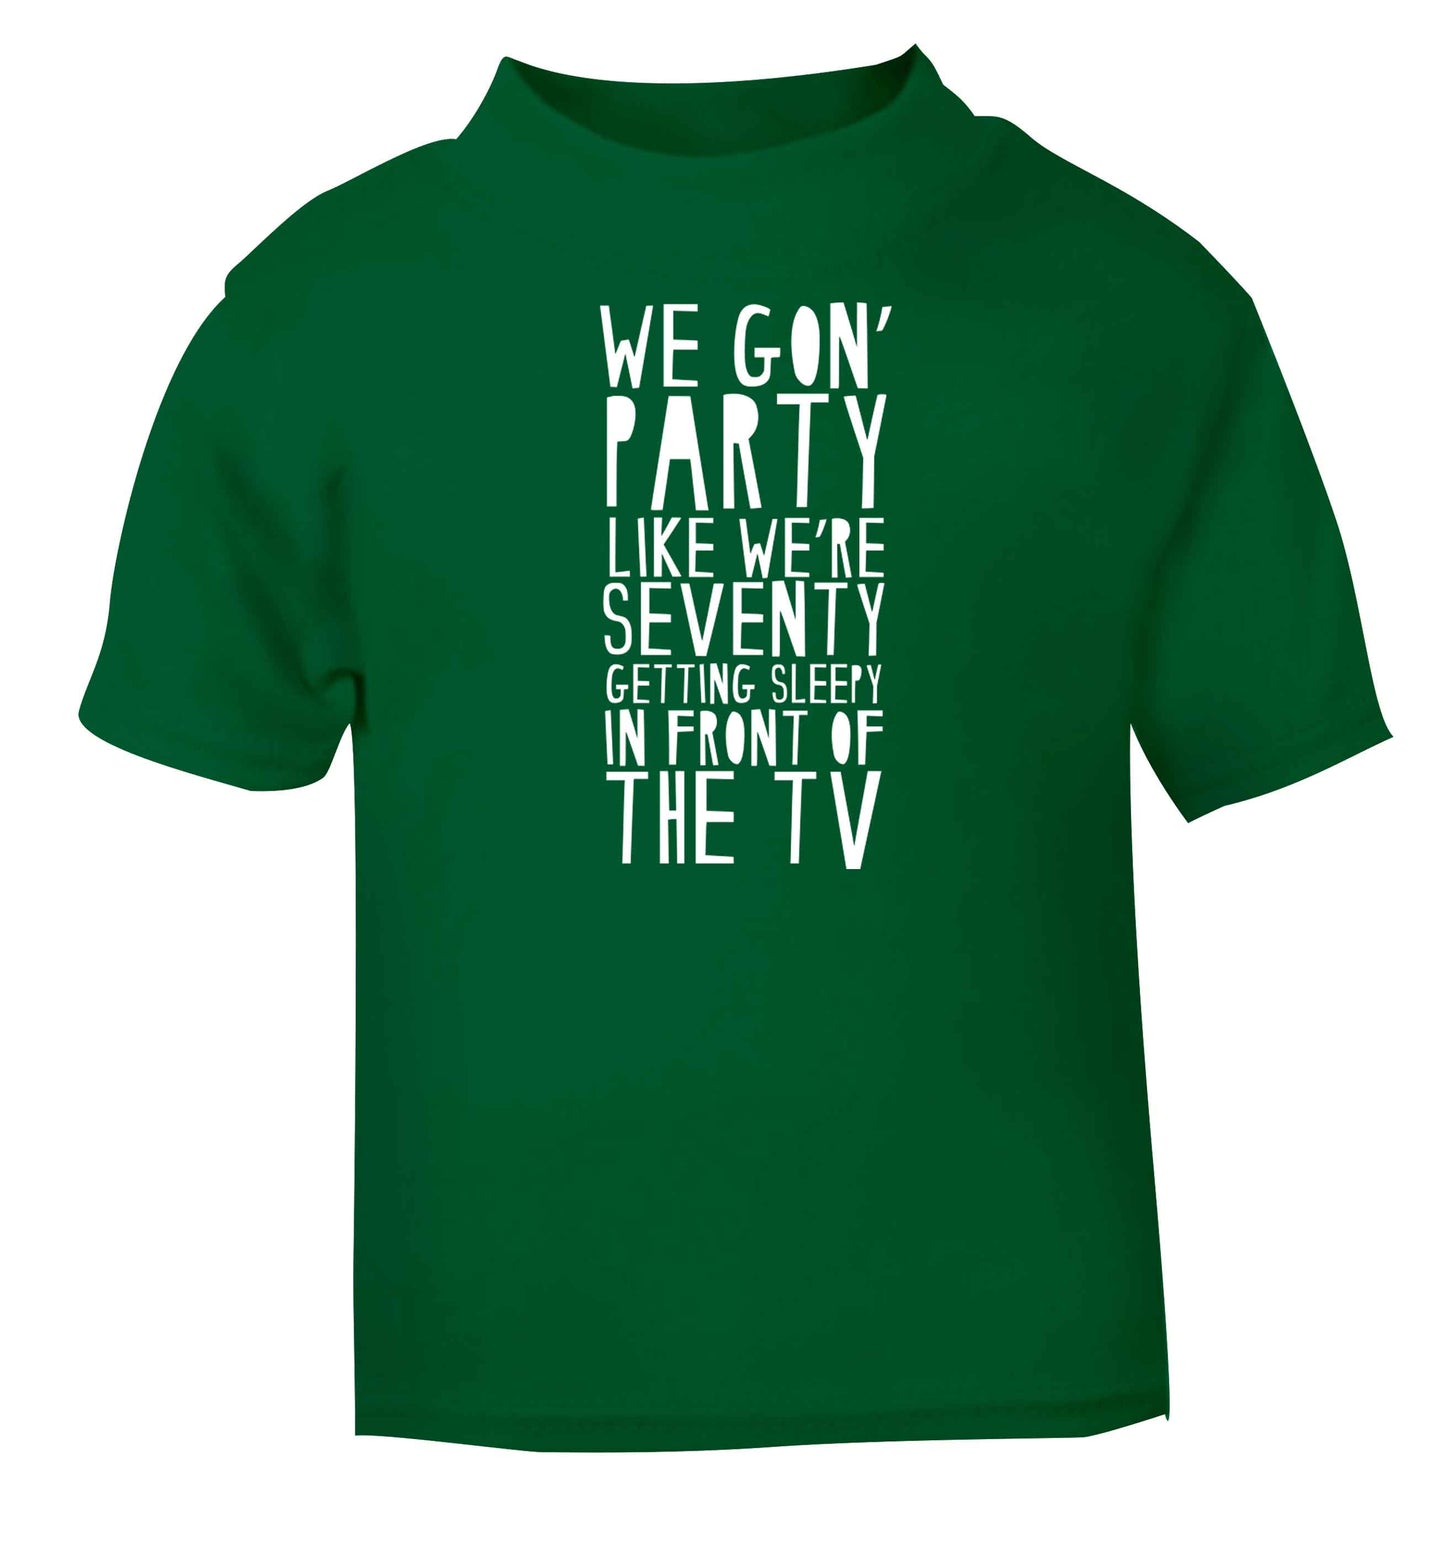 We gon' party like we're seventy getting sleepy in front of the TV green baby toddler Tshirt 2 Years